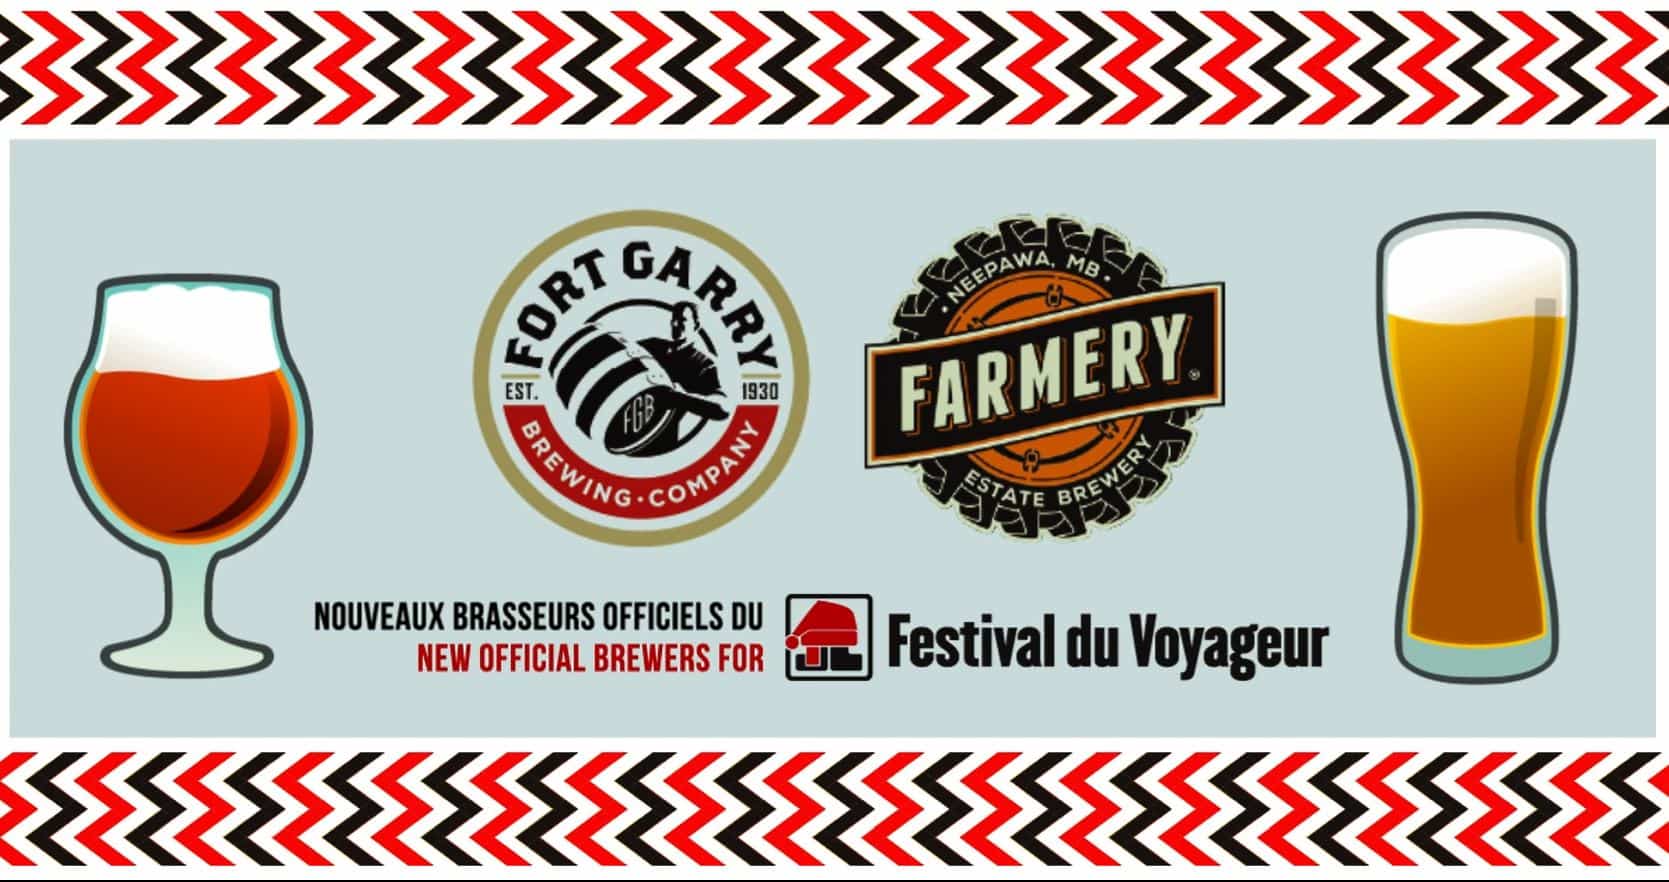 Featured image for “FESTIVAL DU VOYAGEUR CHOOSES LOCAL THROUGH A NEW PARTNERSHIP WITH FORT GARRY BREWING AND FARMERY ESTATE BREWERY”